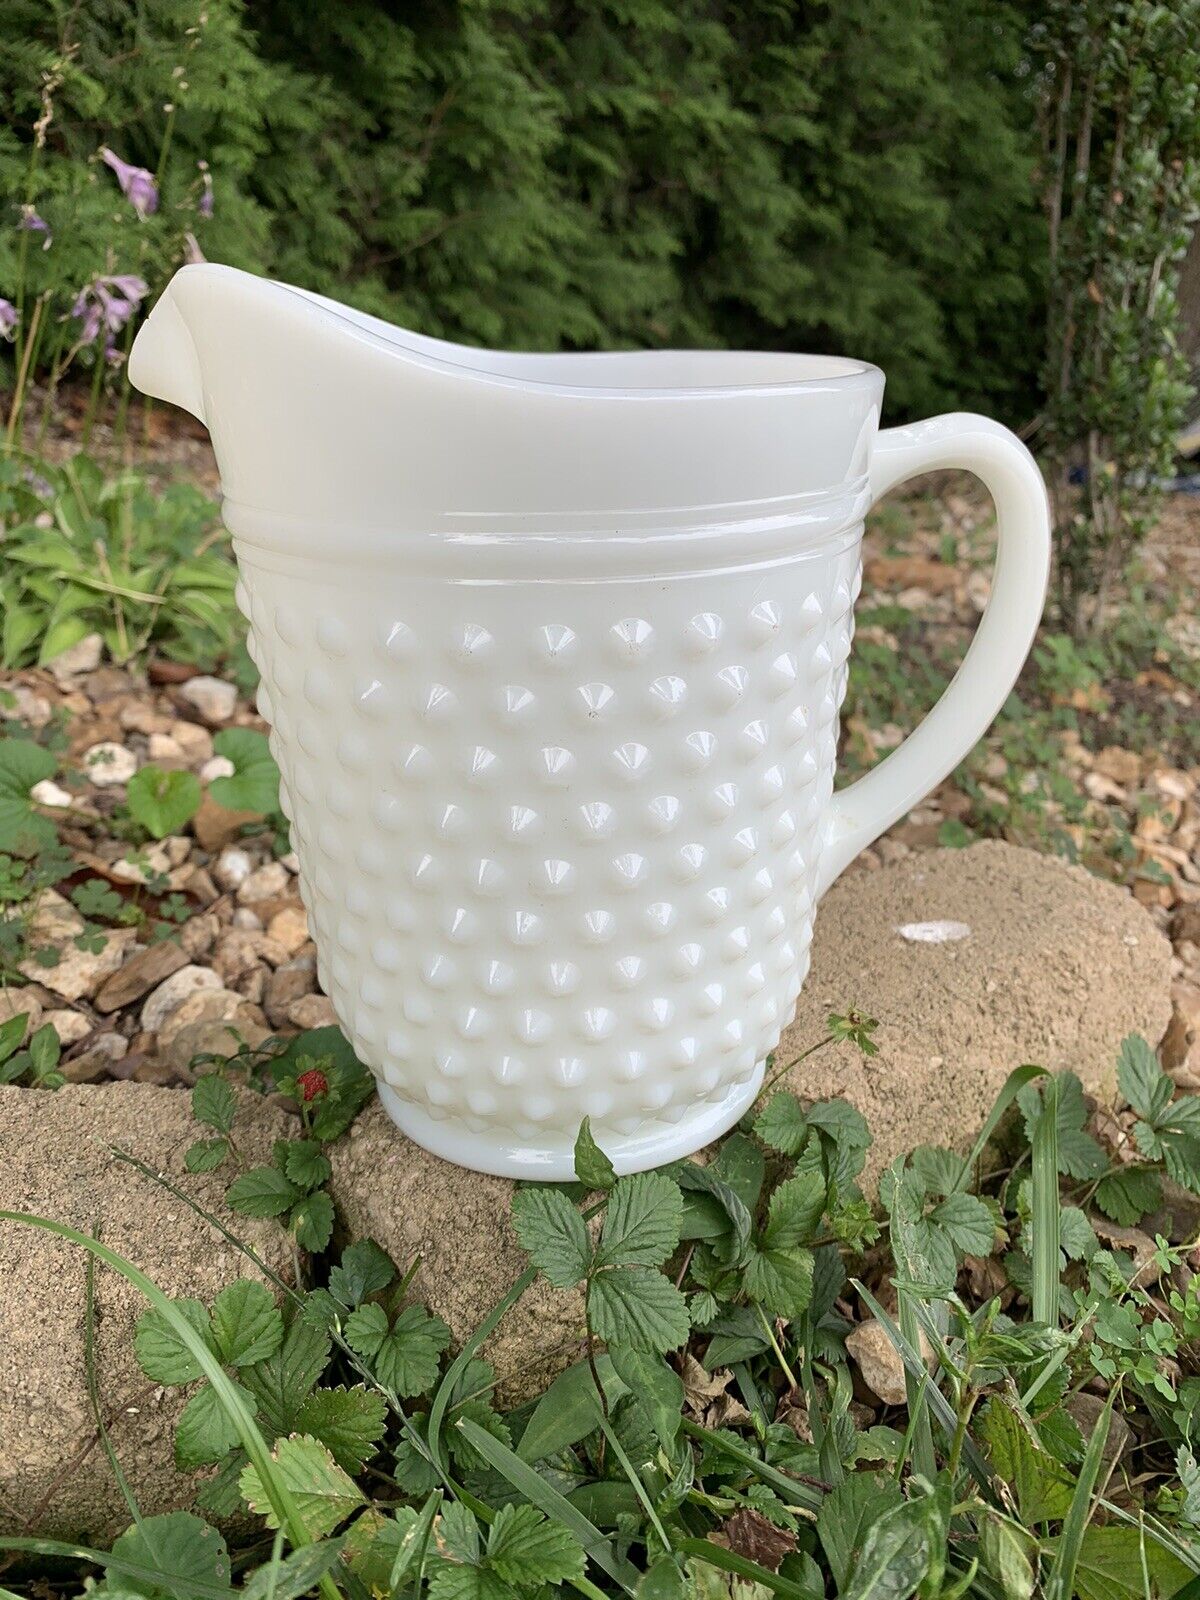 VTG ANCHOR HOCKING MILK GLASS HOBNAIL 64oz PITCHER, OUTSTANDING CONDITION